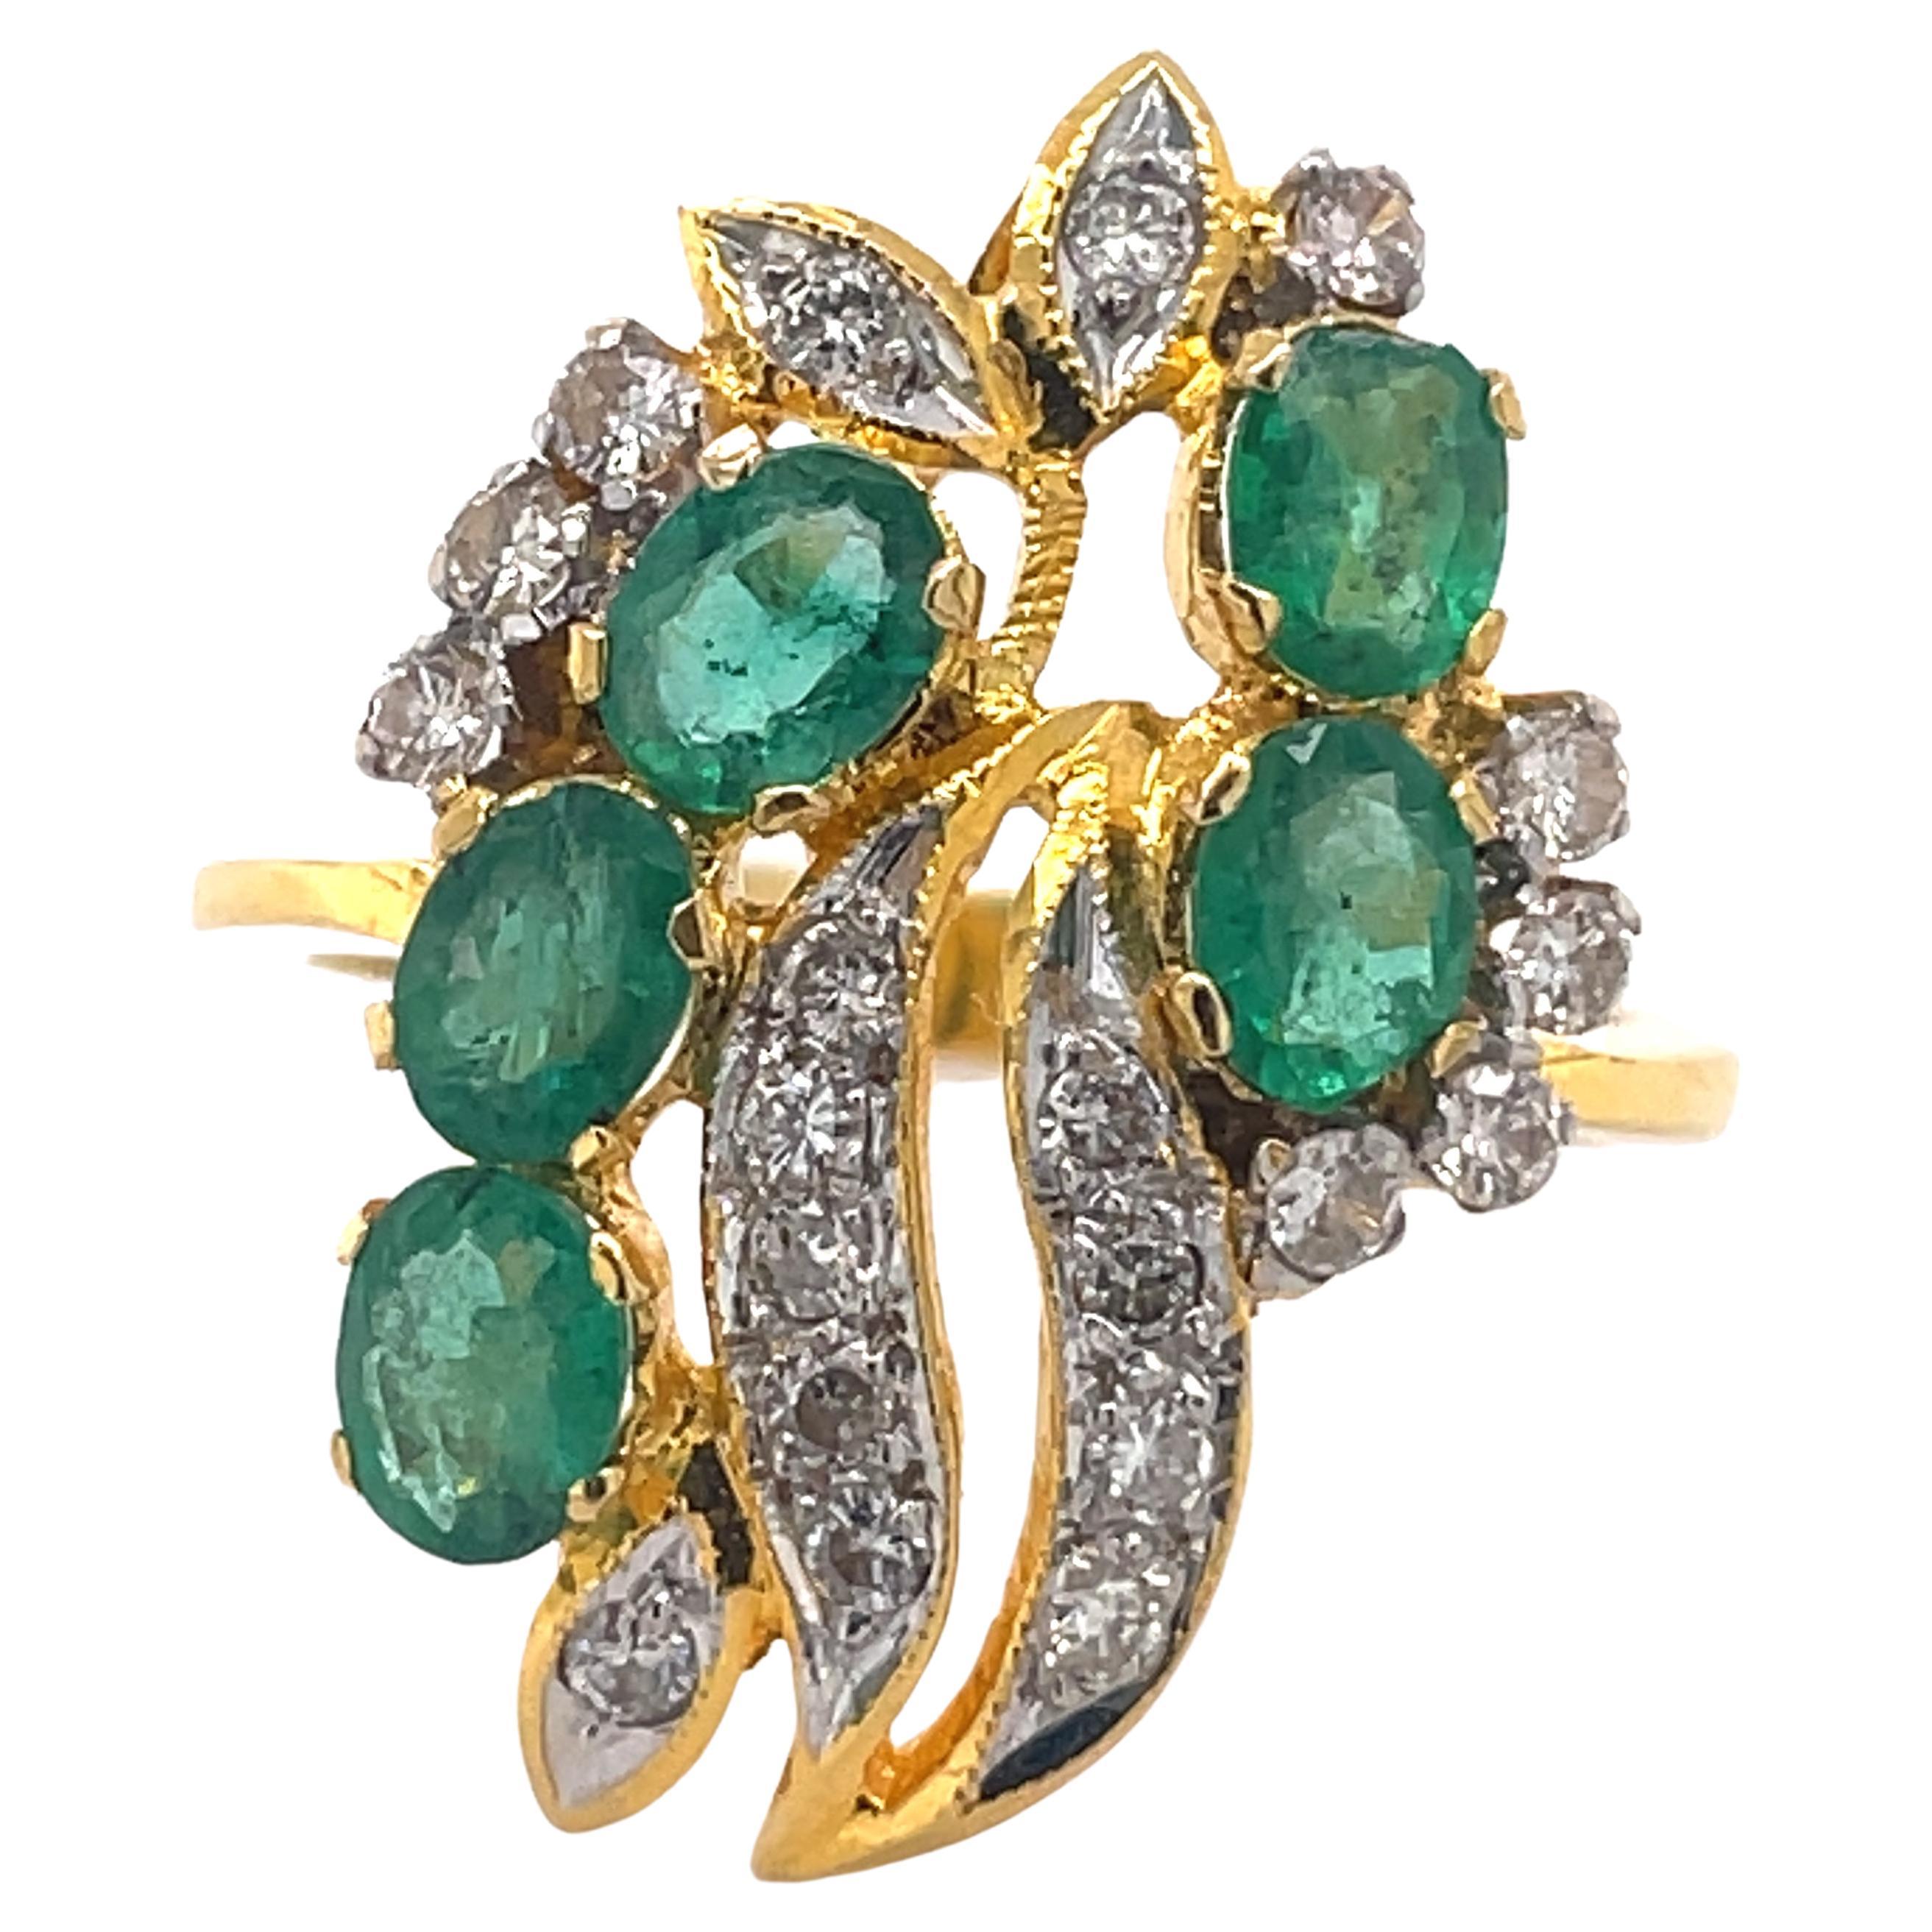 Vintage Cocktail Ring - 22K Yellow gold, 0.50ct Emerald, 0.50ct Diamonds